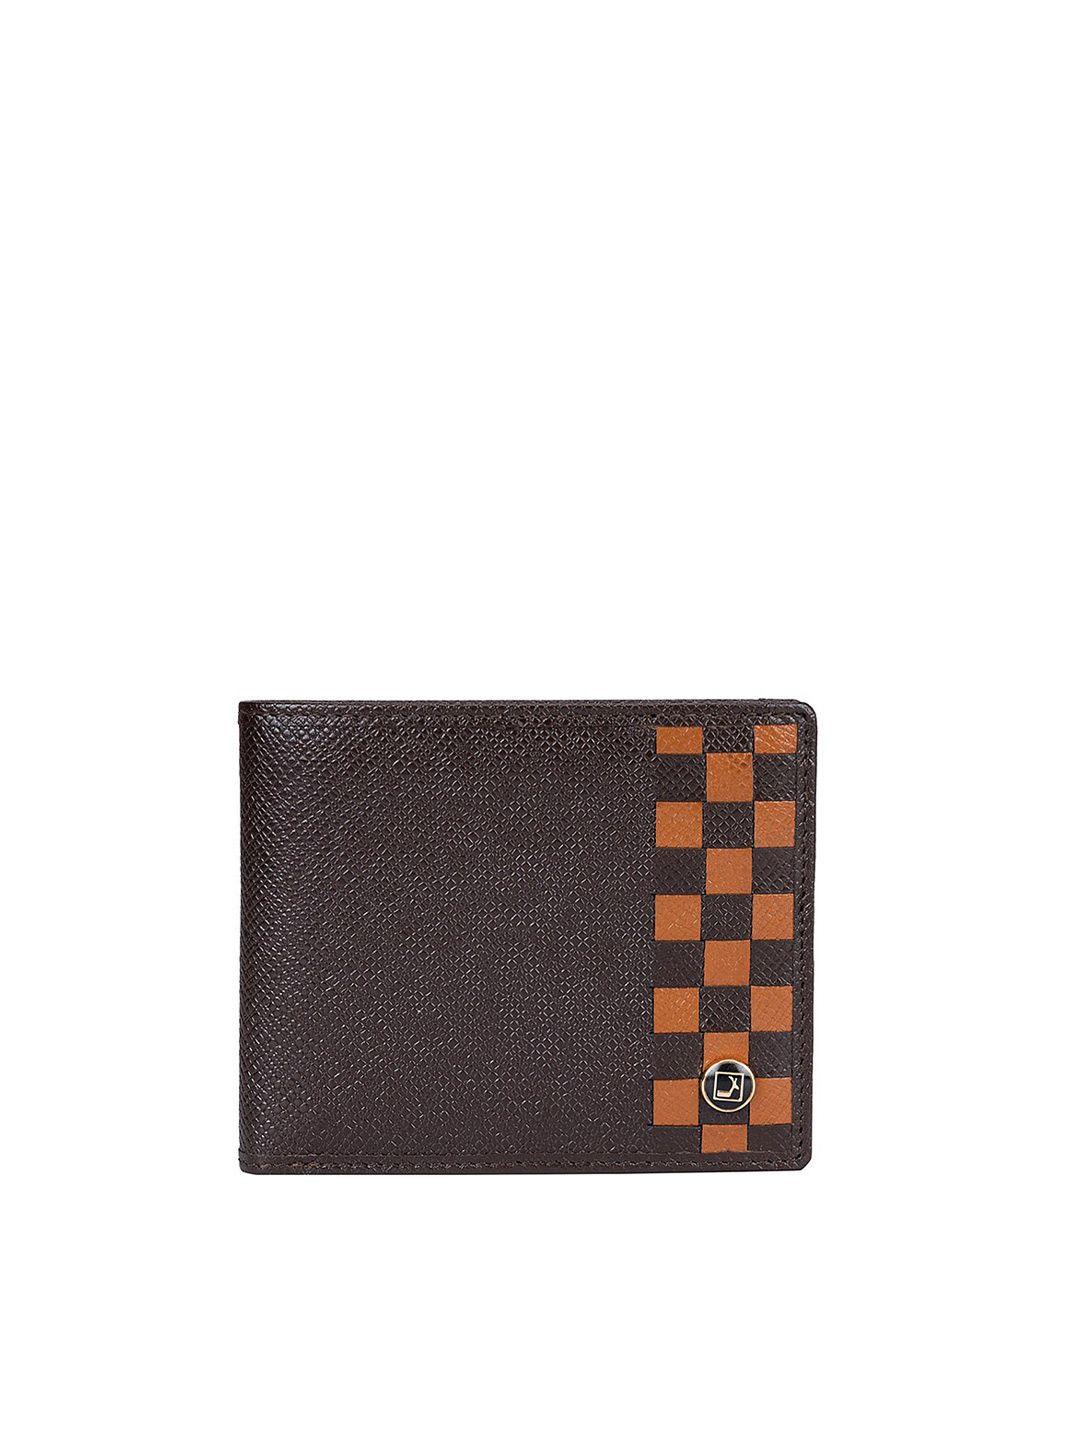 da milano men checked leather two fold wallet with sd card holder